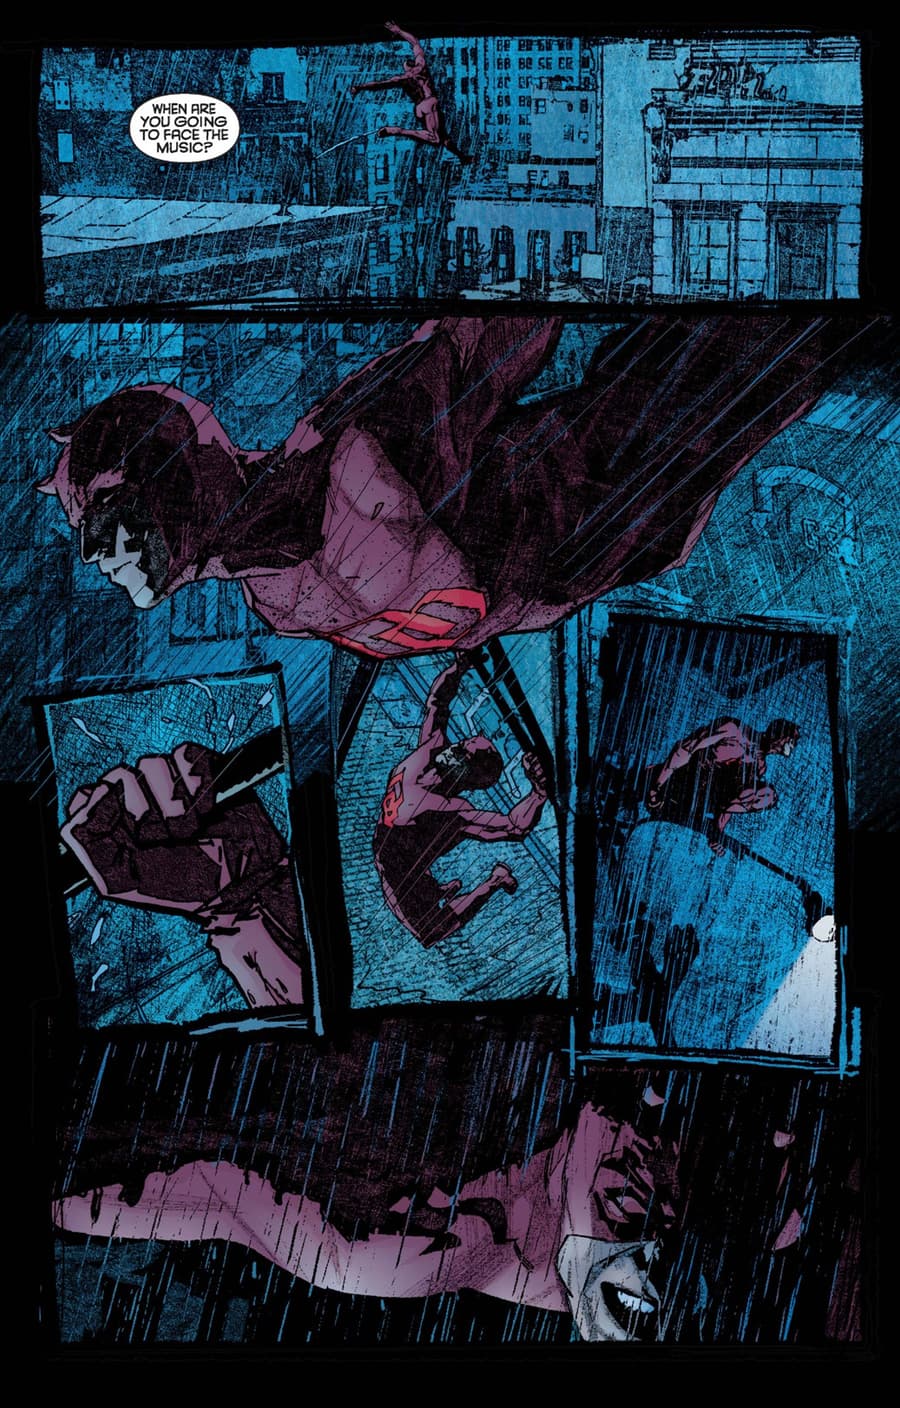 DAREDEVIL (1998) #34 page by Brian Michael Bendis and Alex Maleev